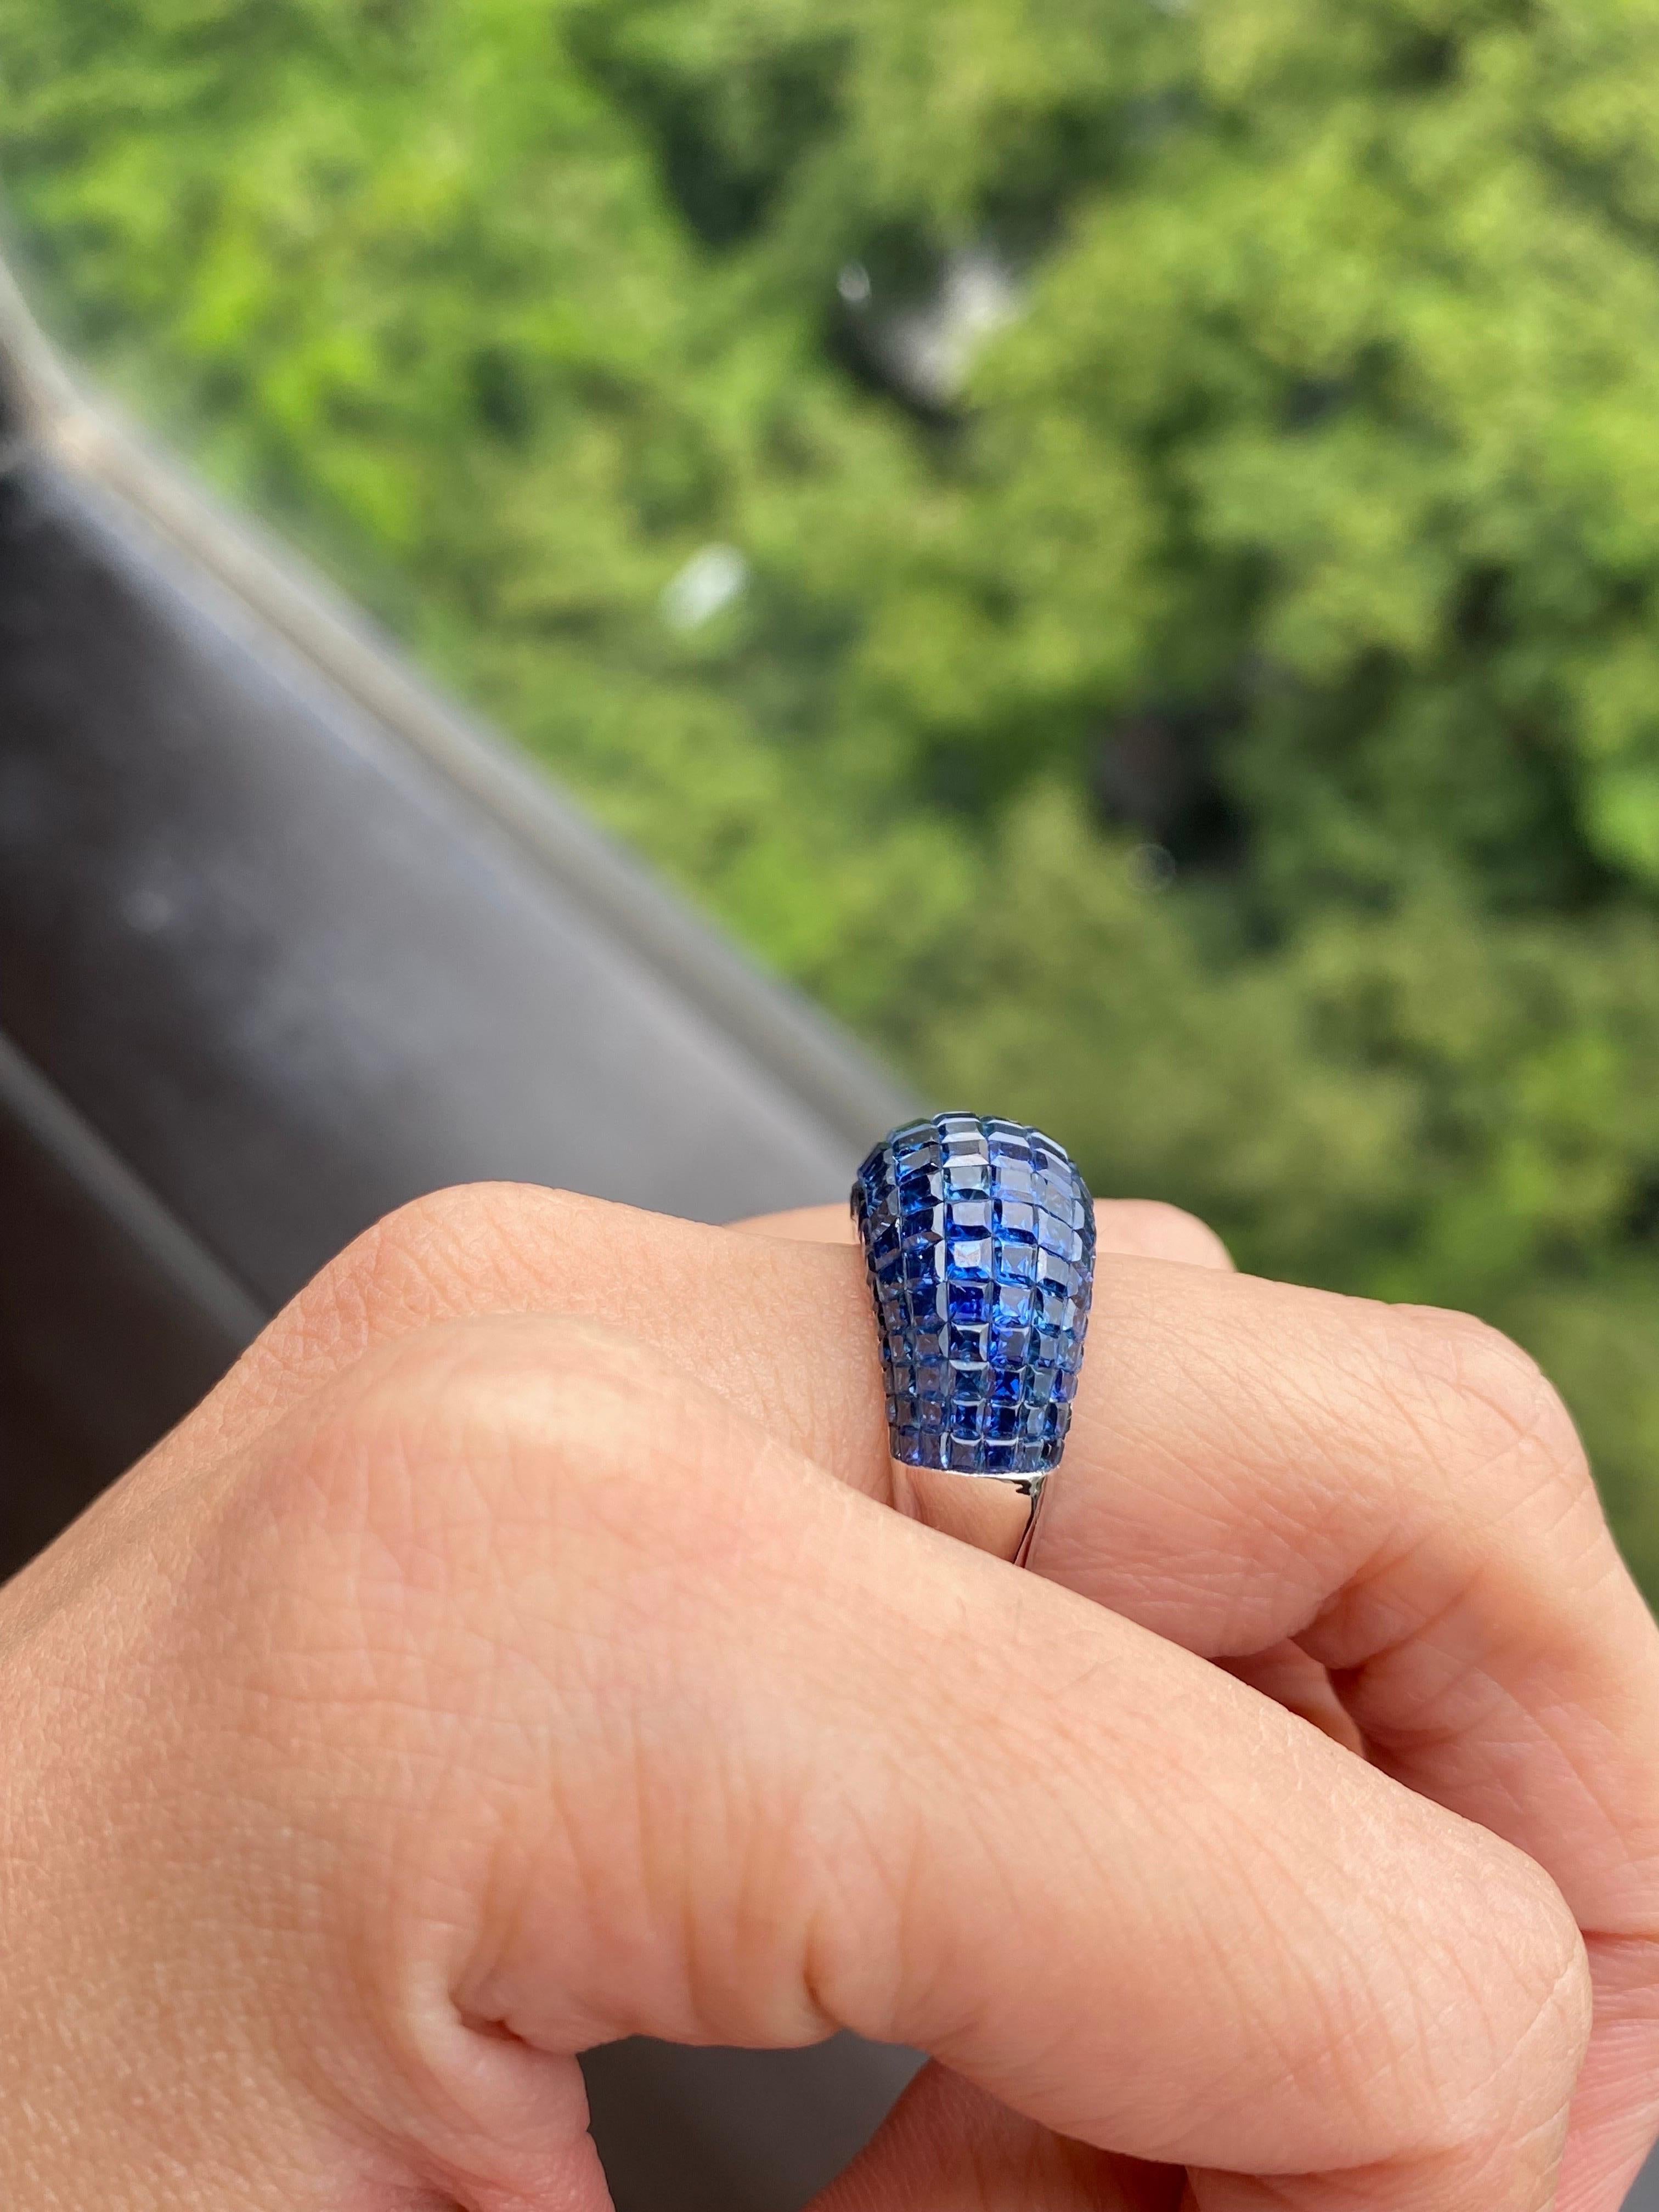 A beautifully hand-crafted 16.63 carat Blue Sapphire cocktail ring, set in solid 18K White Gold. The ring is currently sized at US 6, can be resized. This is an art-deco inspired, invisibly set Sapphire ring with a modern touch.
We provide free